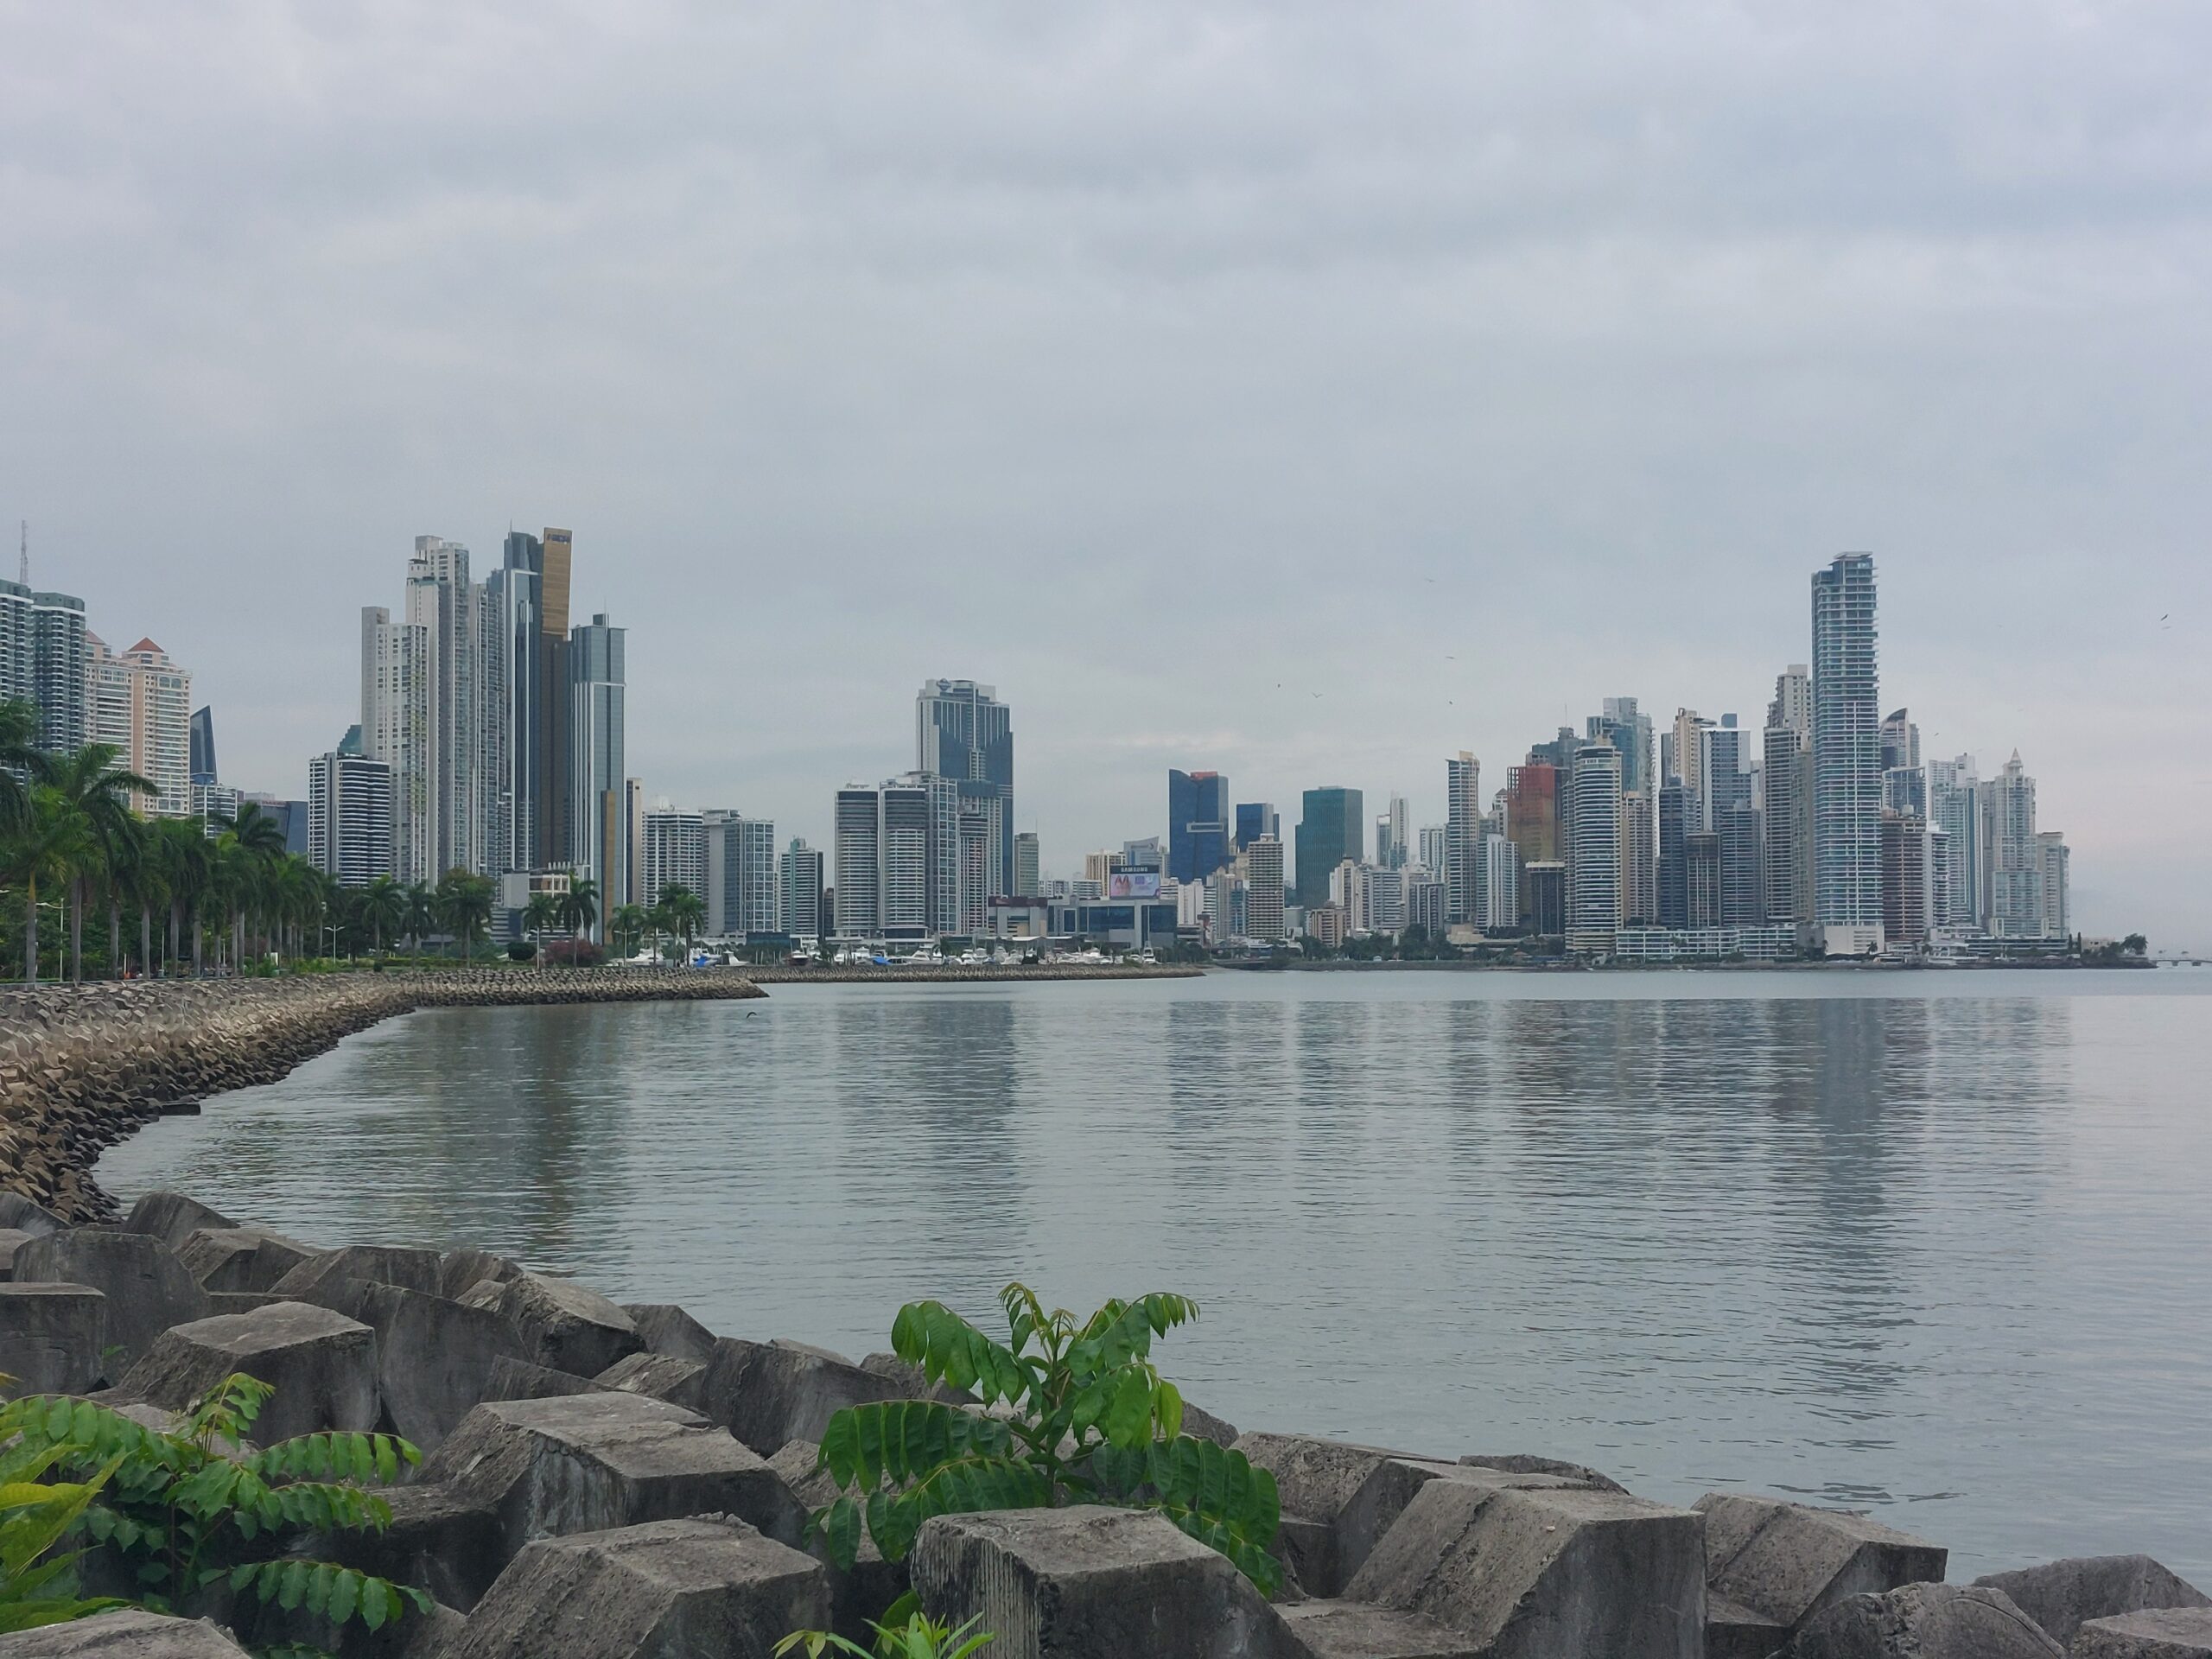 Why is Panama City worth visiting?